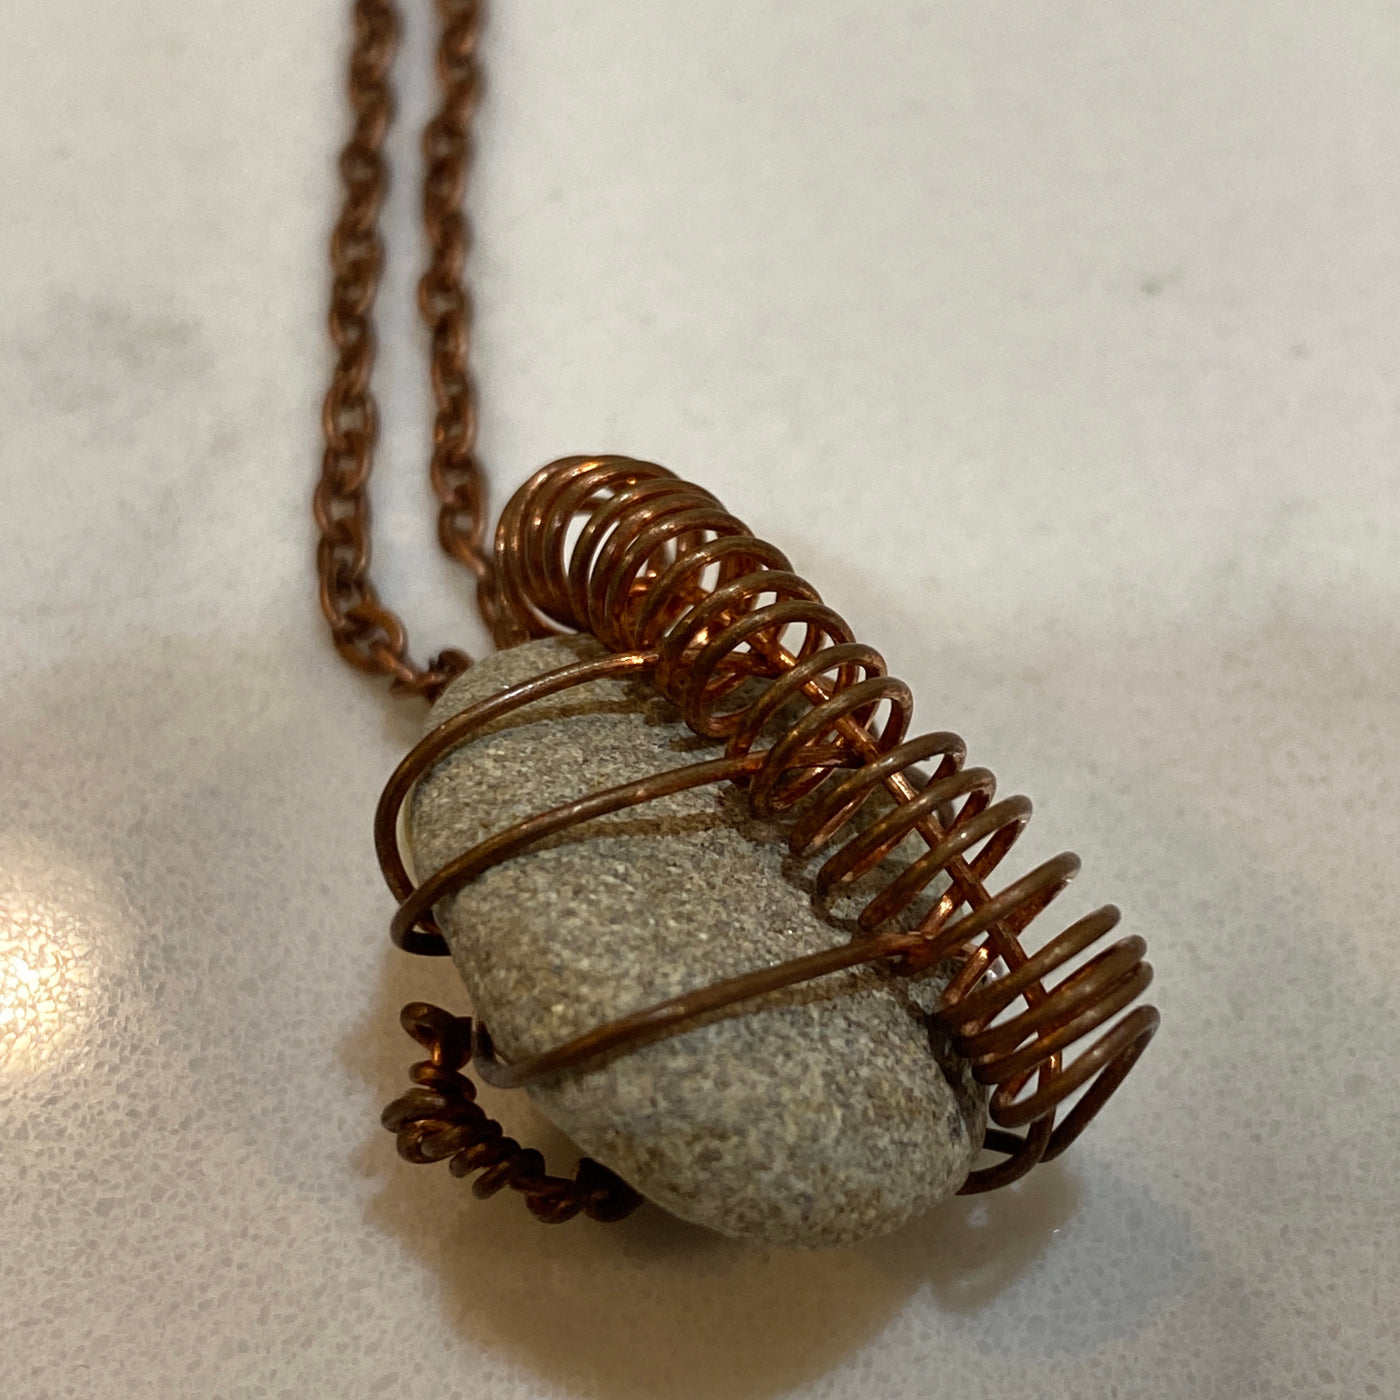 Grey natural stone on wire. Small pendant.